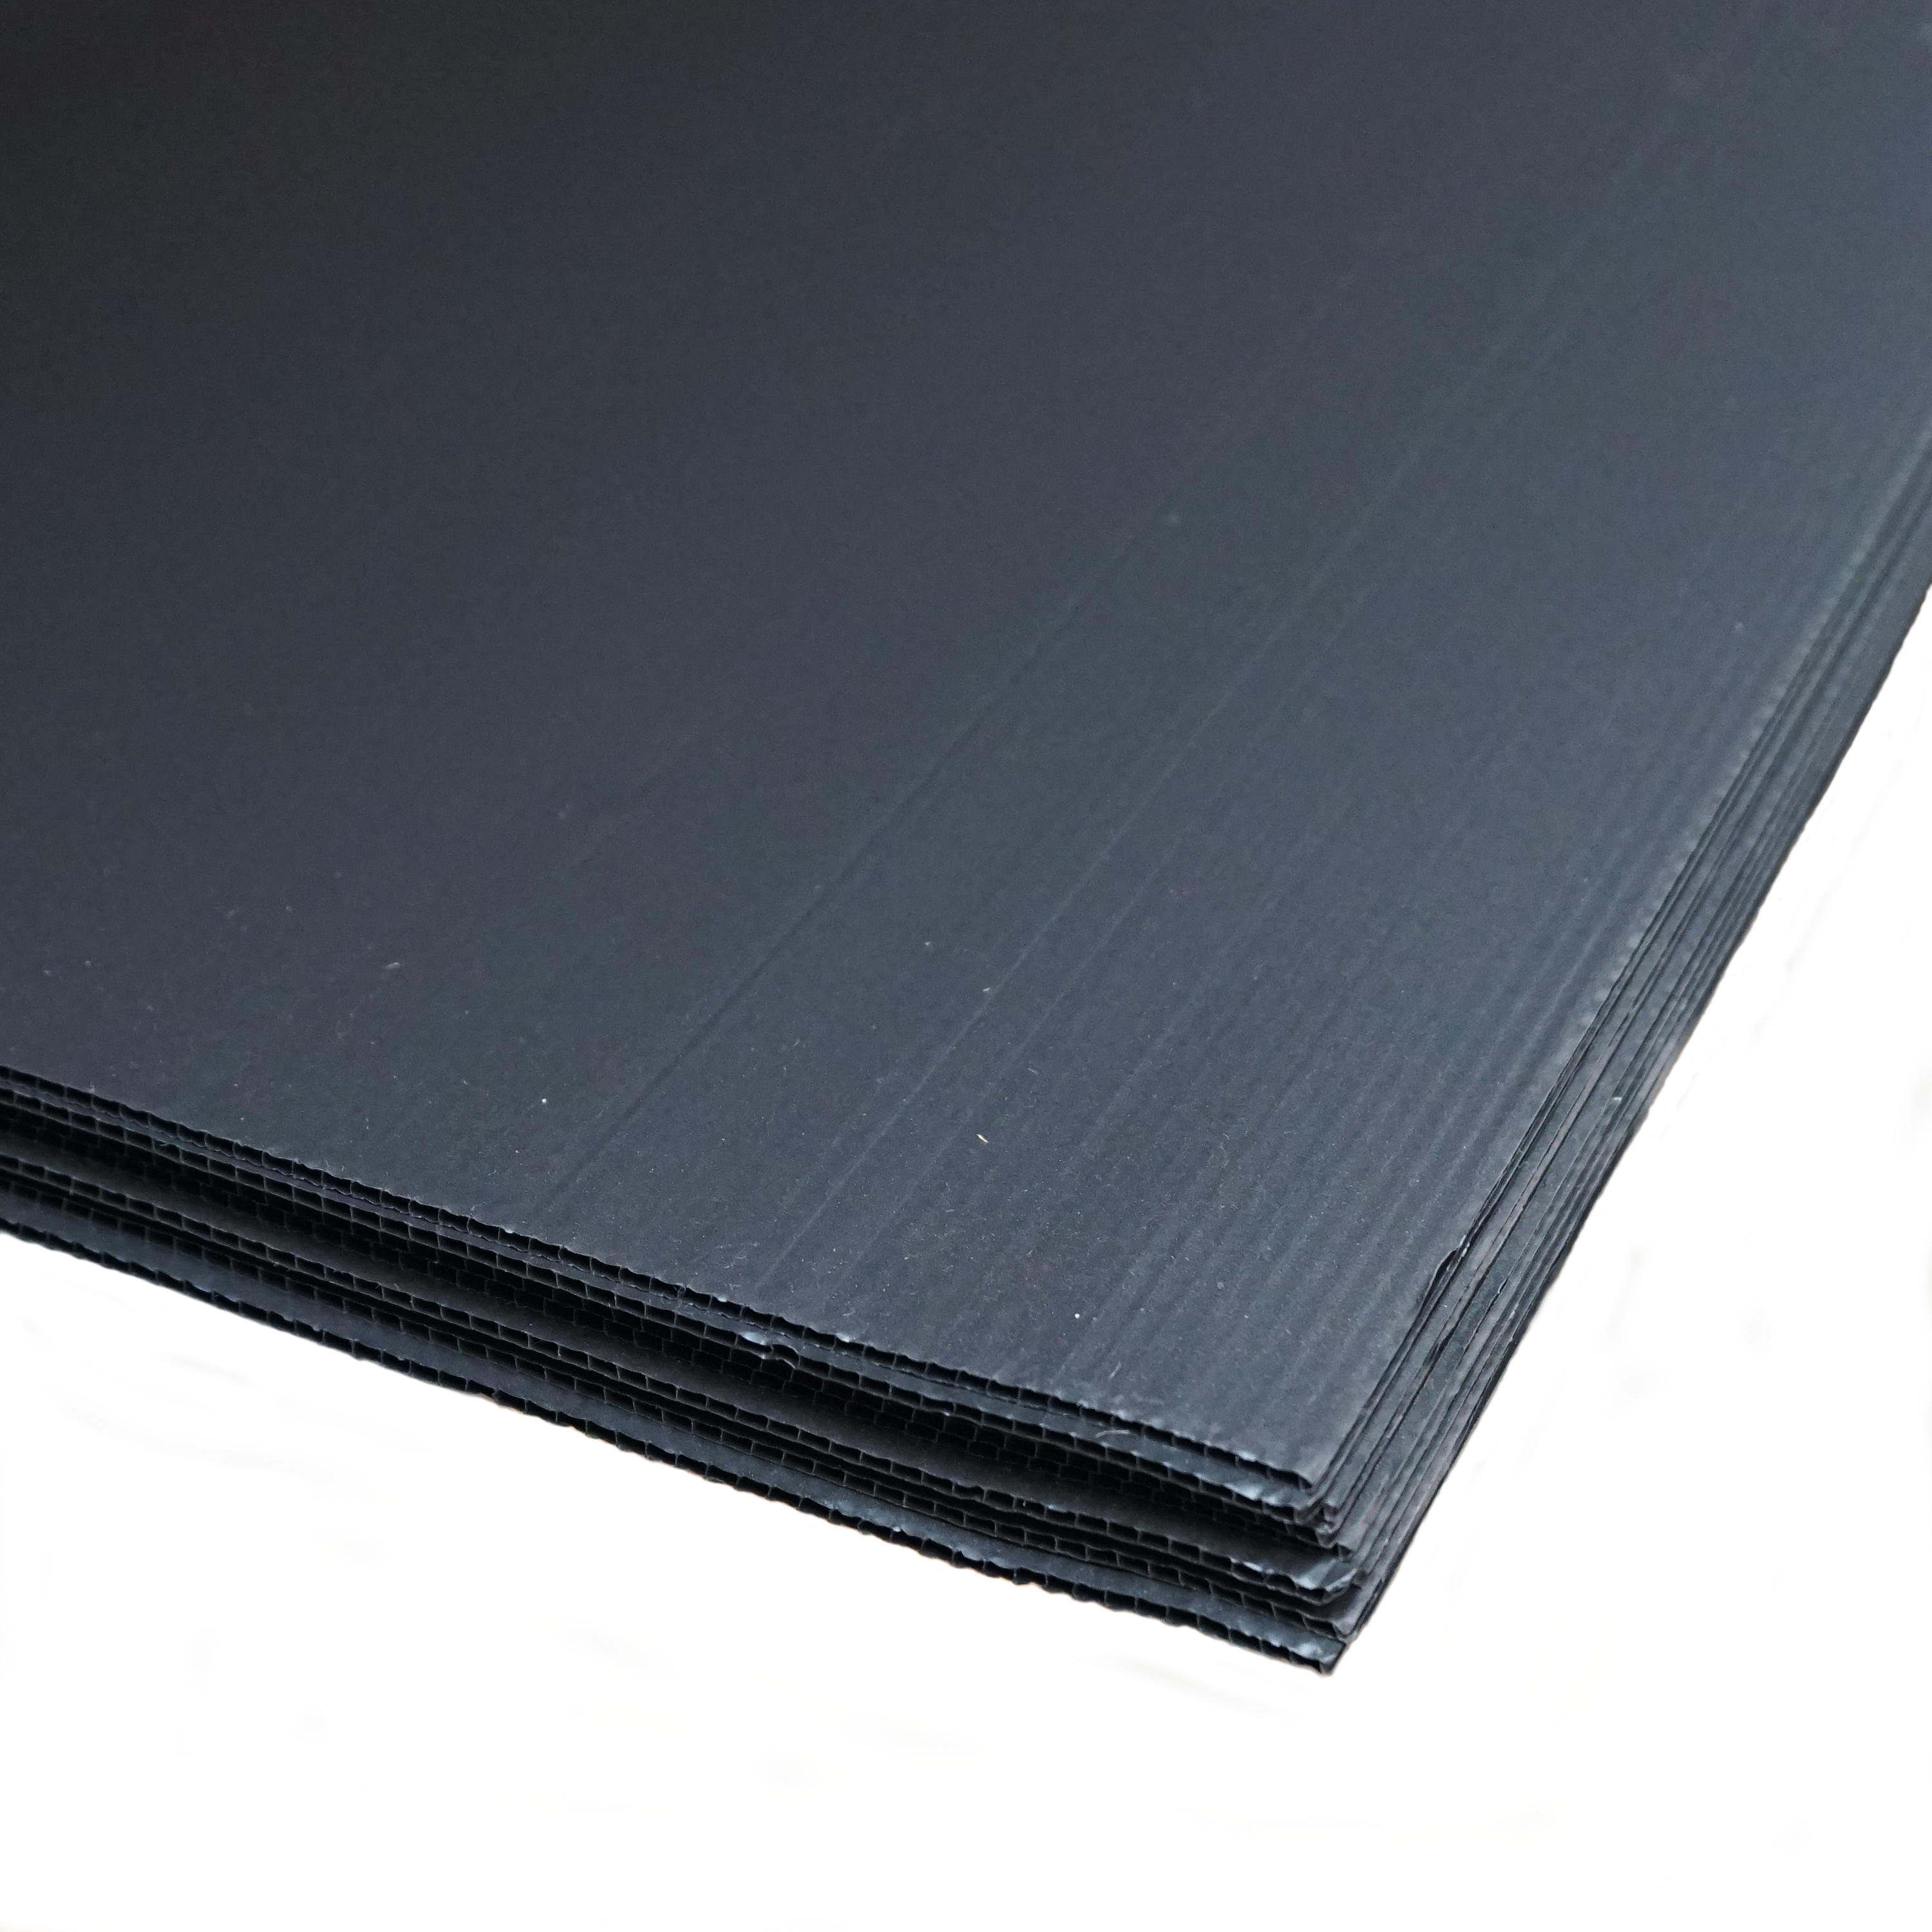 PACK OF 25 2.4m x 1.2m 2mm/250gsm Black Recycled Protection Board